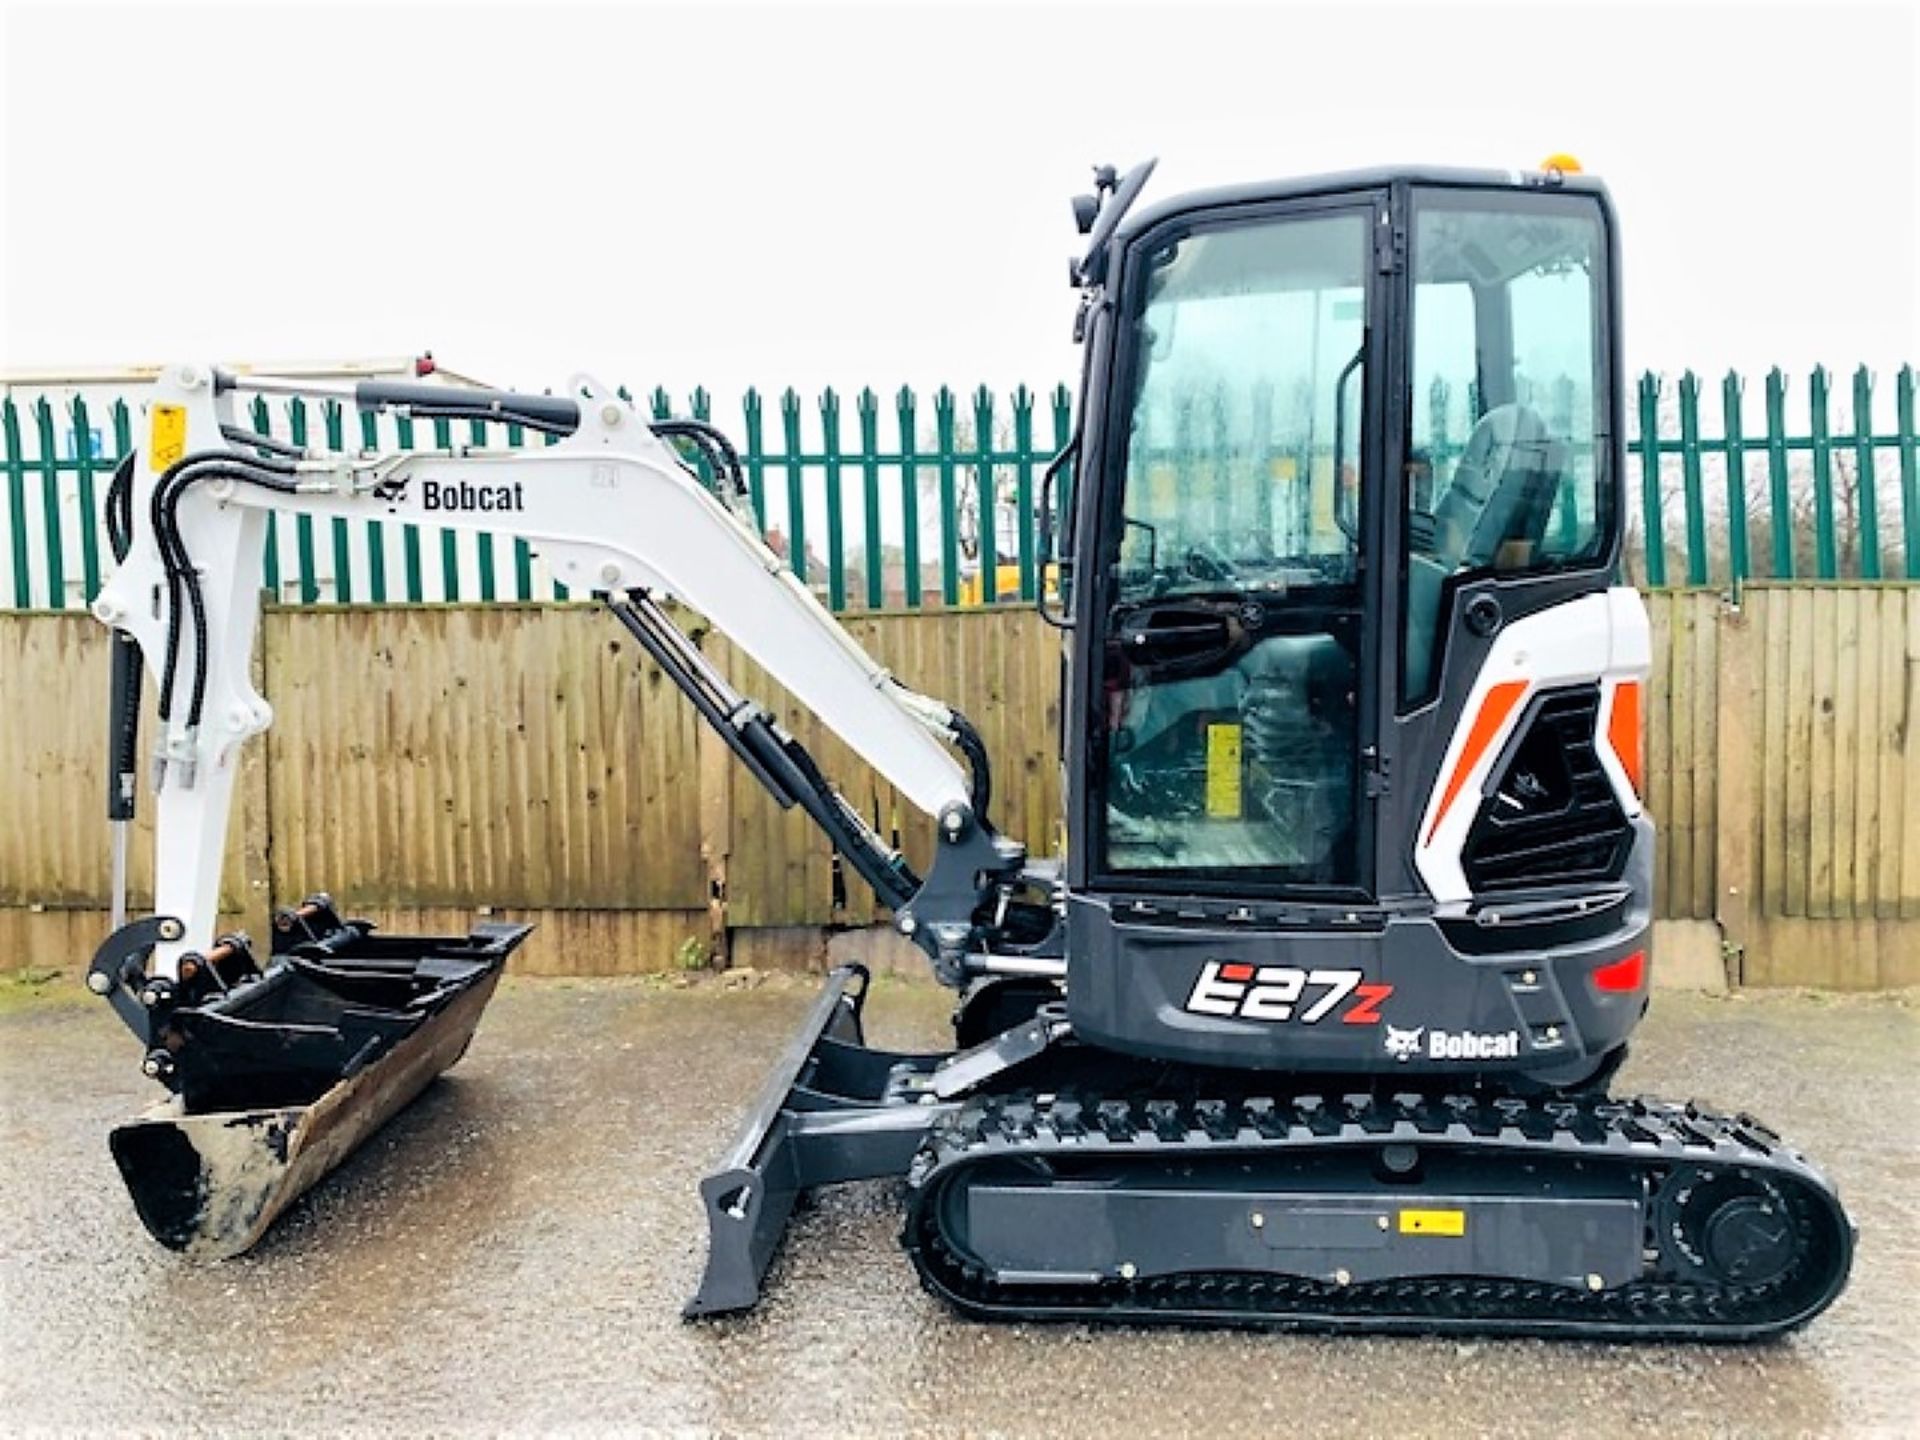 BOBCAT E27Z TRACKED RUBBER CRAWLER DIGGER / EXCAVATOR, YEAR 2019, 55 HOURS, QUICK HITCH & 3 BUCKETS